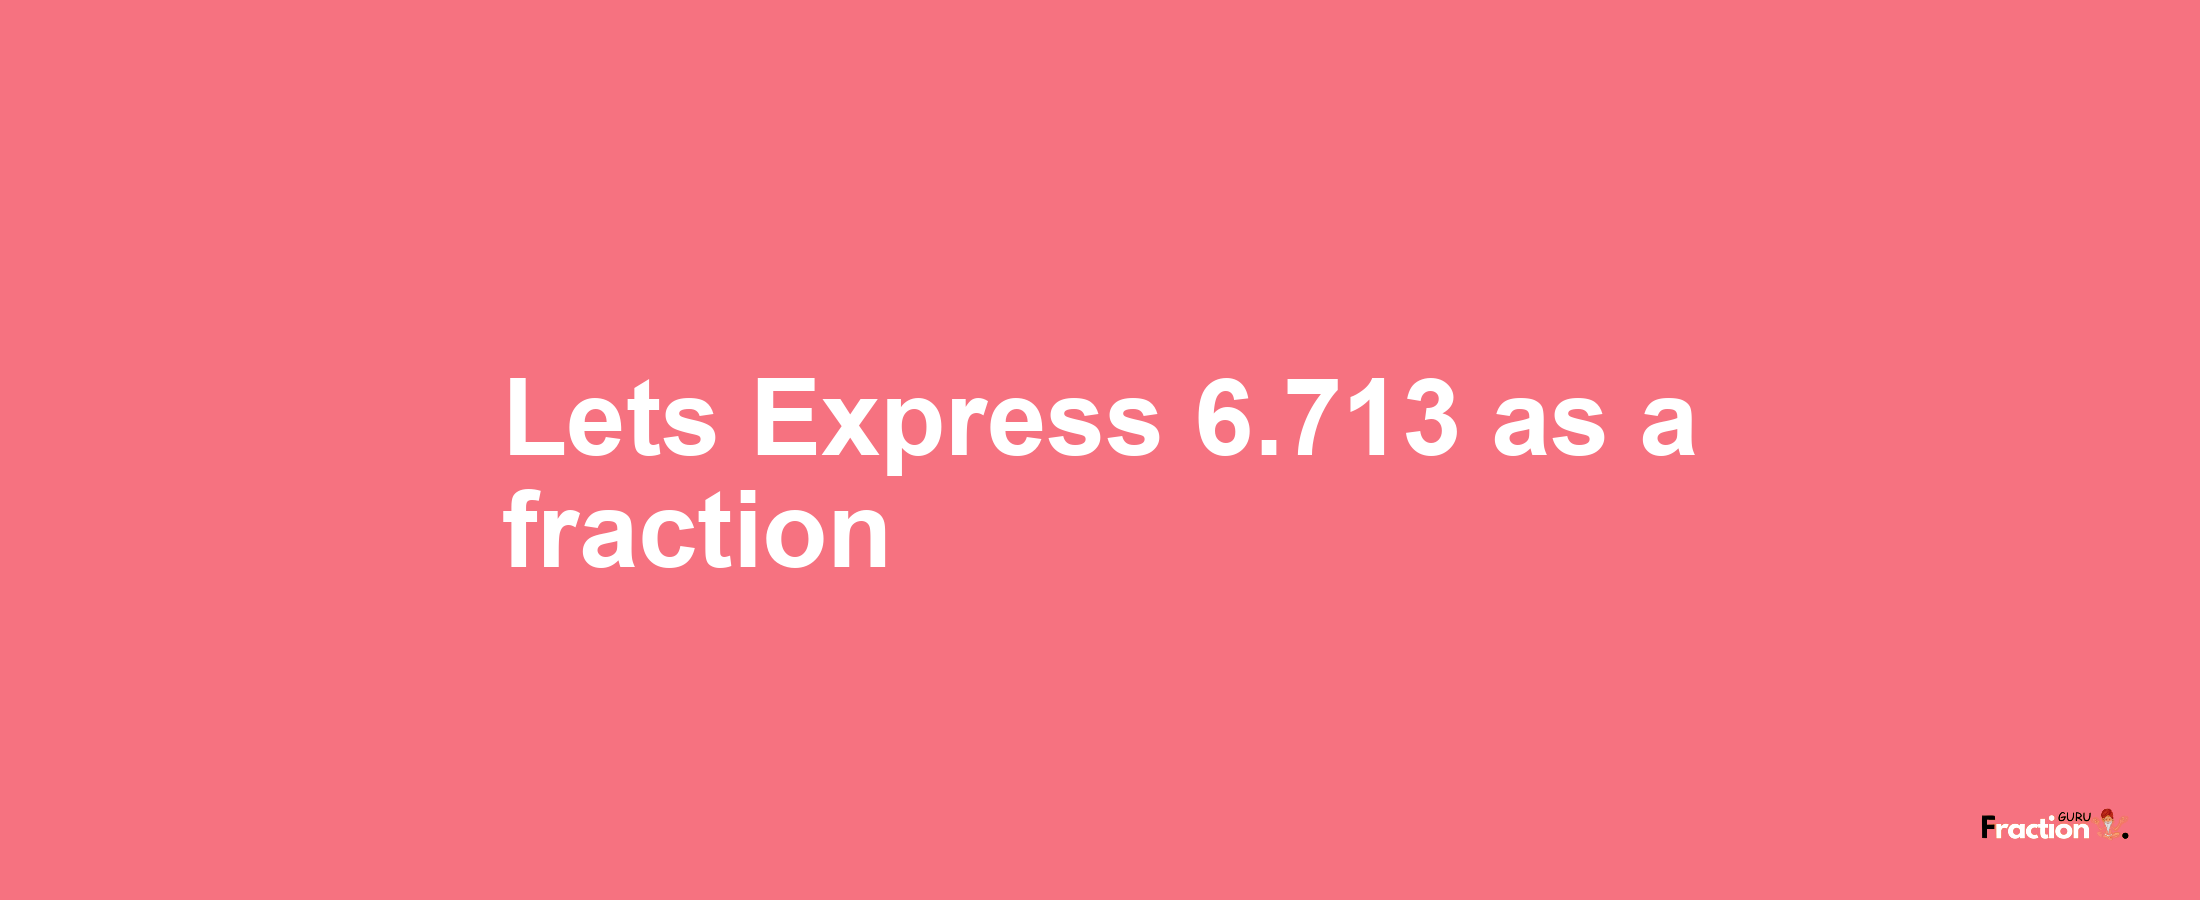 Lets Express 6.713 as afraction